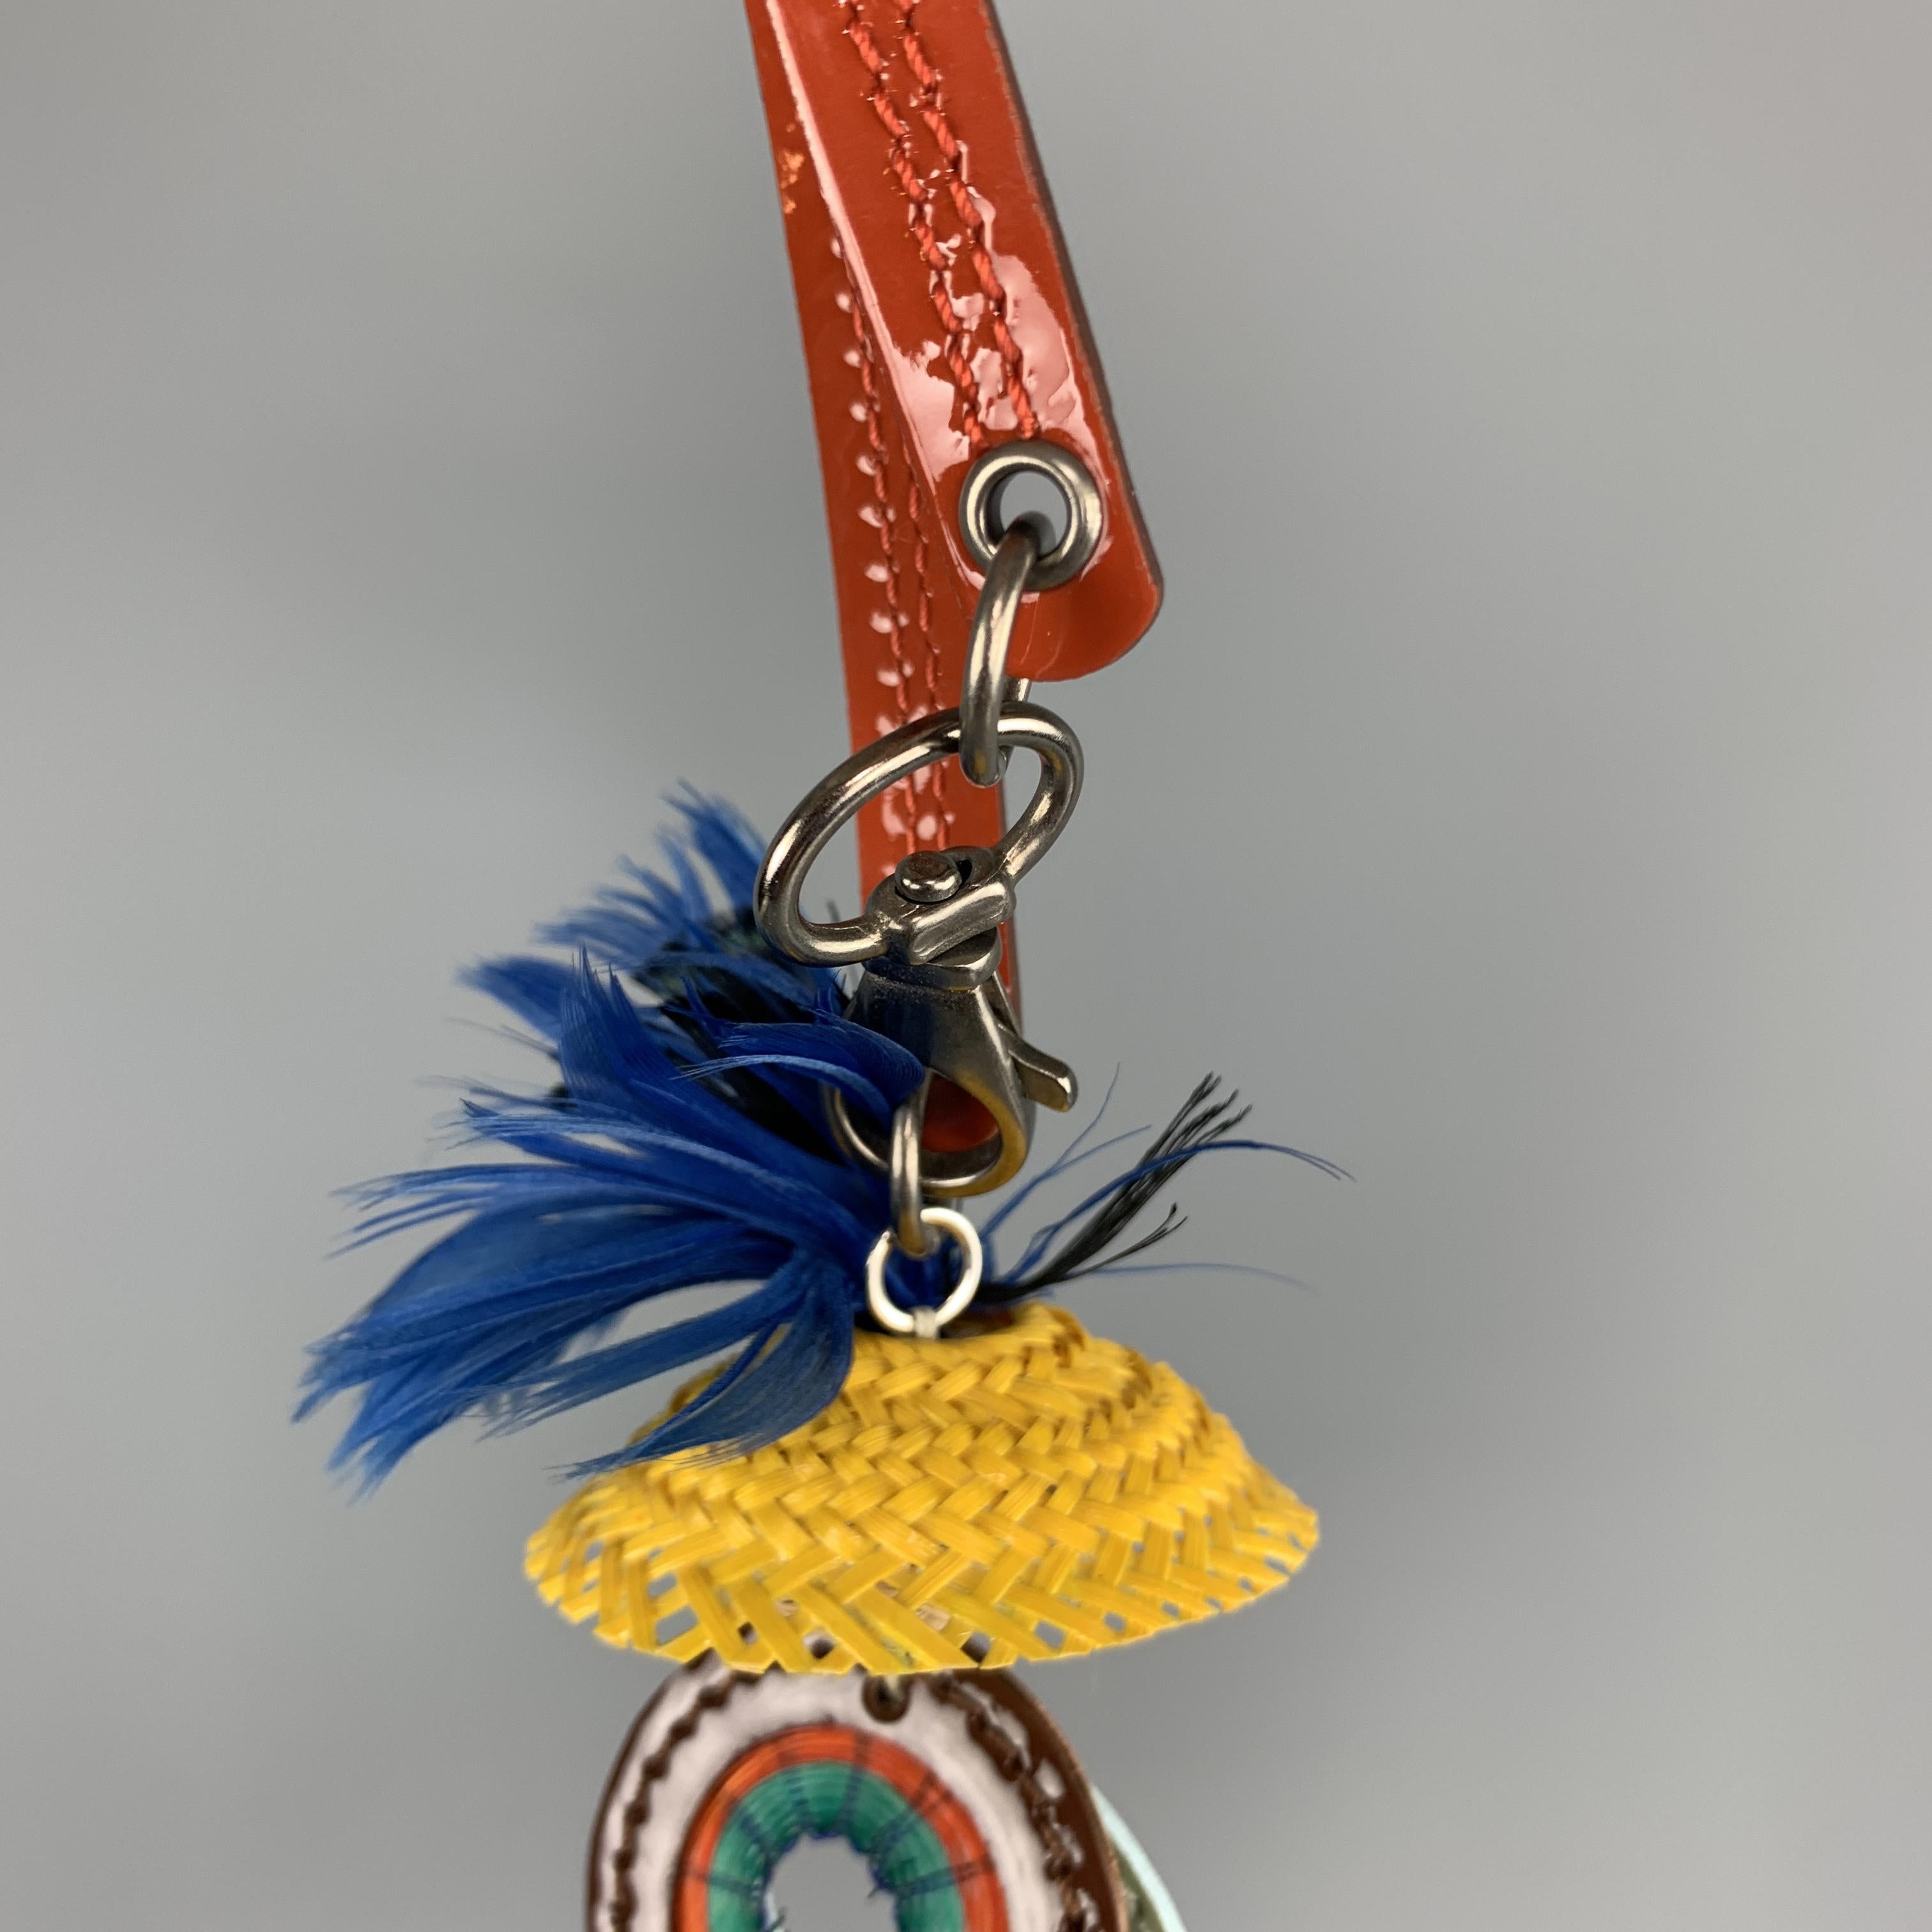 MARNI Key Ring Bag Charm comes in multi-color tones in mixed materials, with patent leather strap, blue feathers, straw, plastic and silver tone metal hardware, contrast stitching, and a lobster clasp closure. With dust bag and box.
 
Excellent